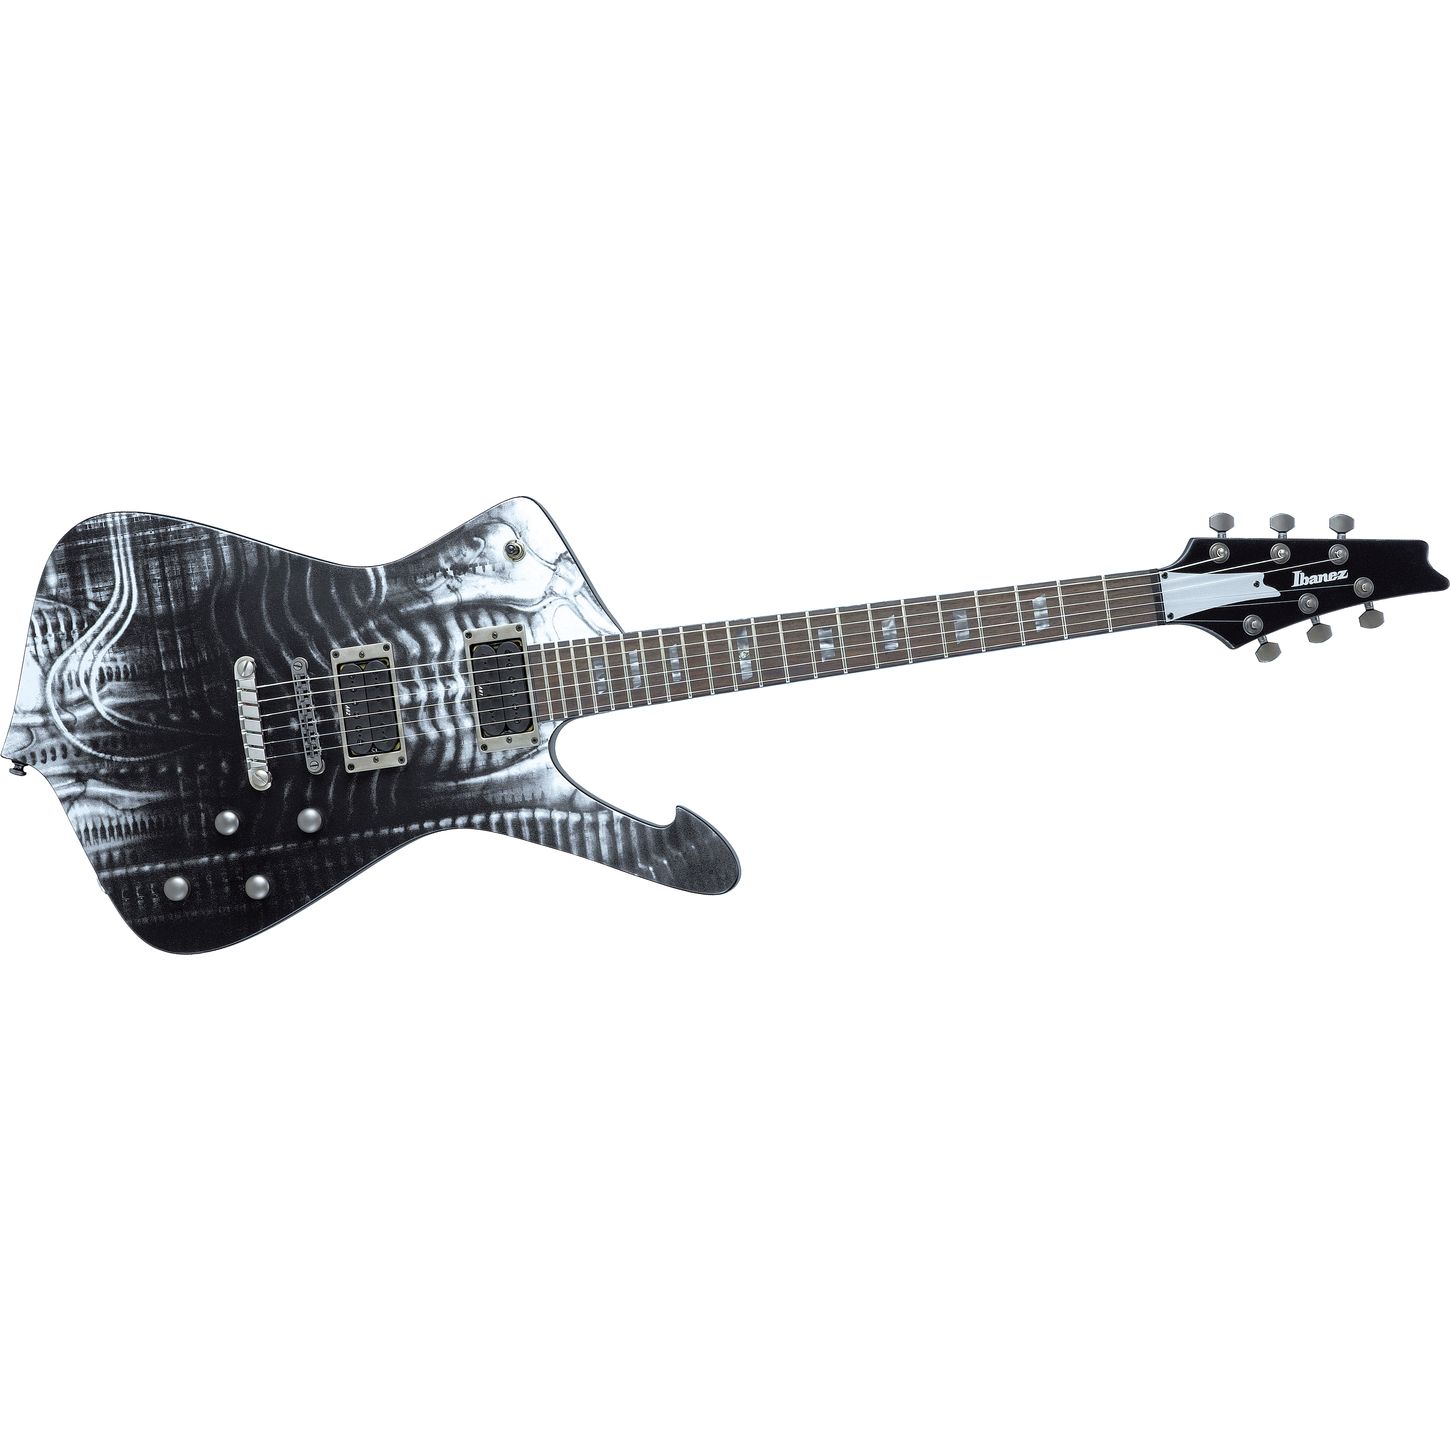 Get the guaranteed on Signature Model Electric Guitars like the Ibanez H.R....